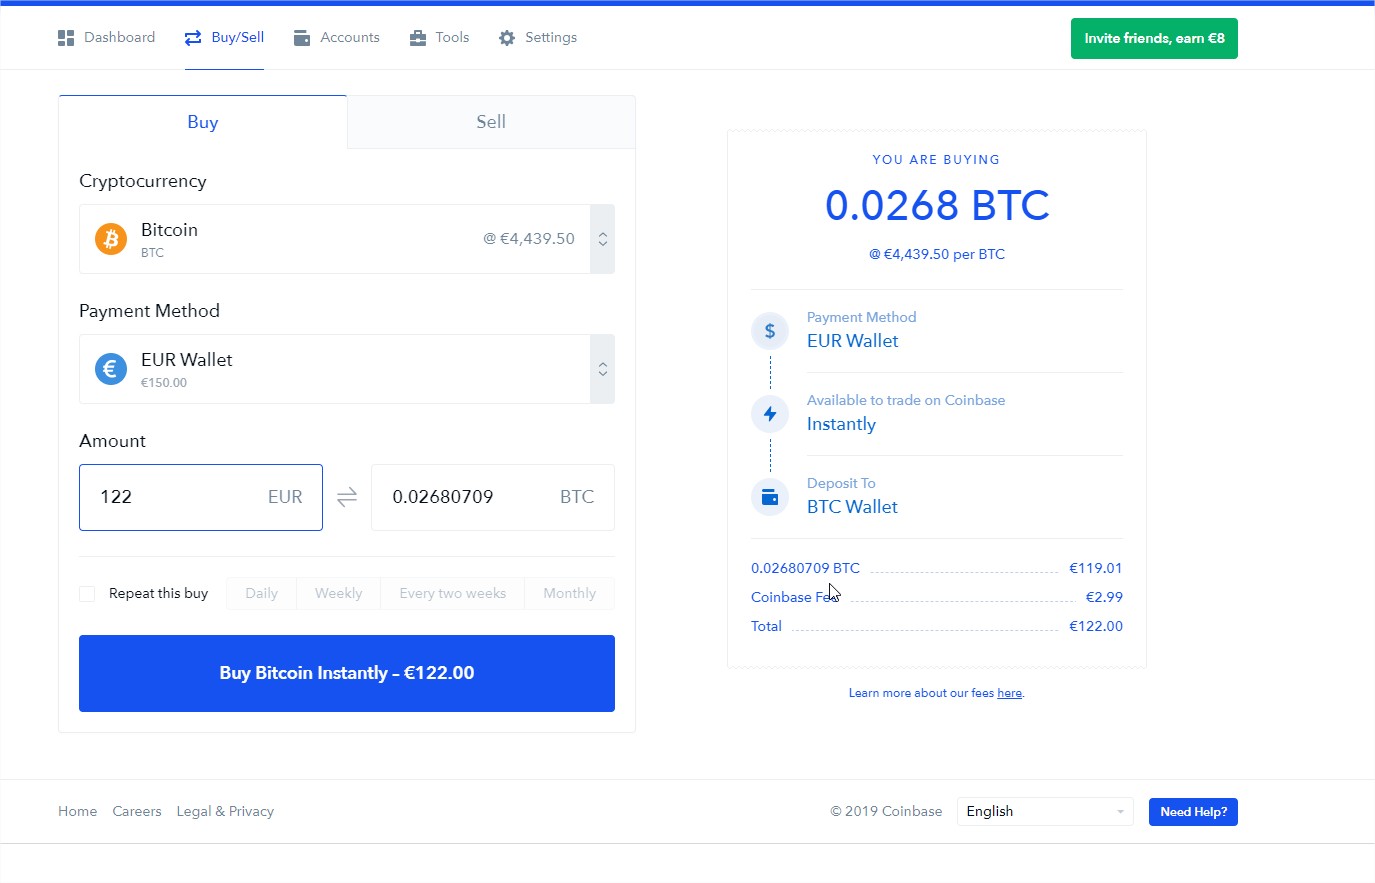 can i sell my bitcoin on coinbase